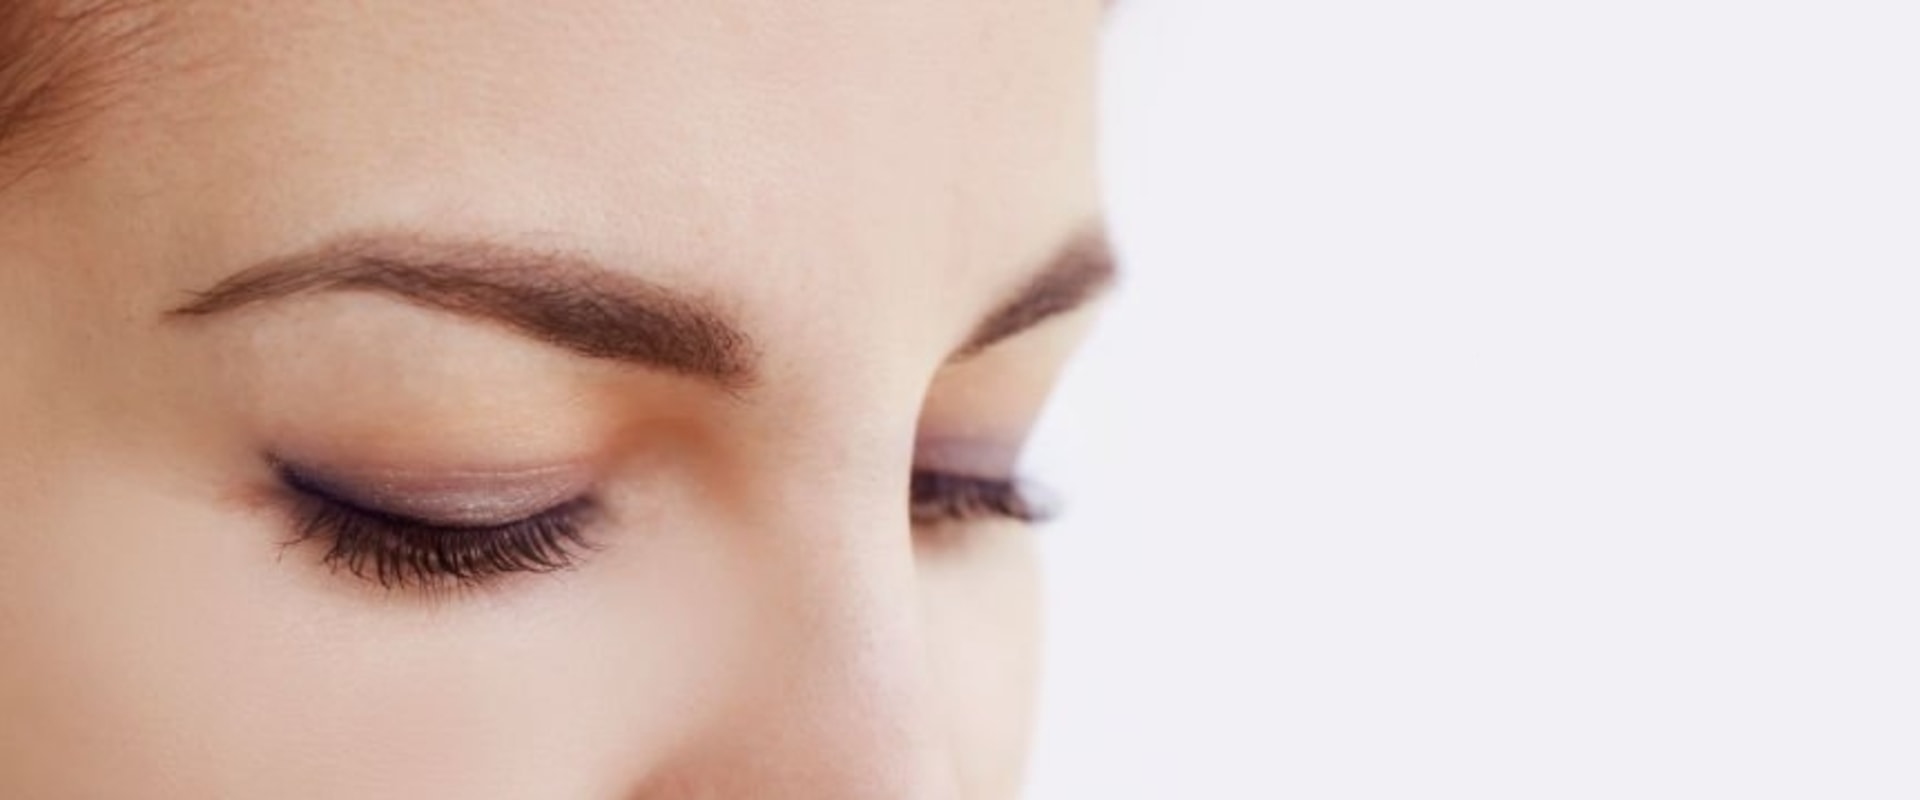 What are the benefits of eyelashes?